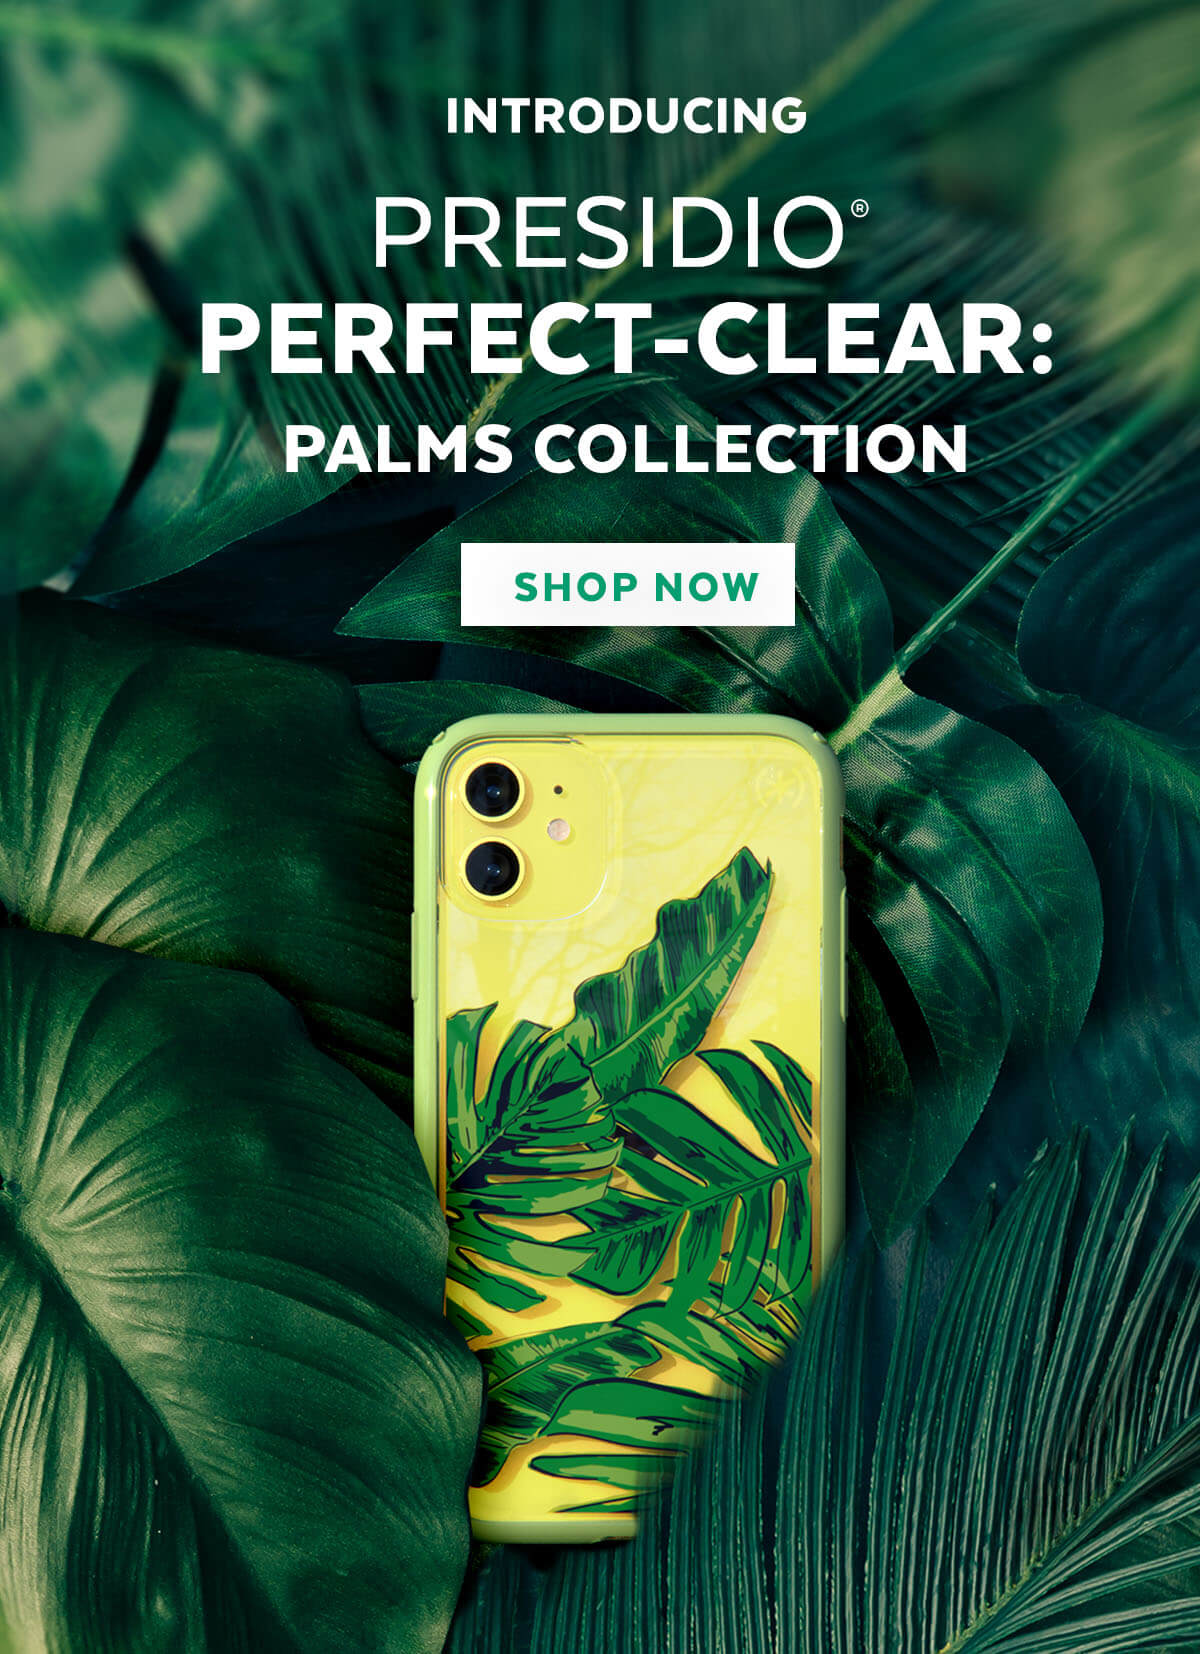 Introducing Presidio Perfect-Clear: Palms Collection. Shop now!